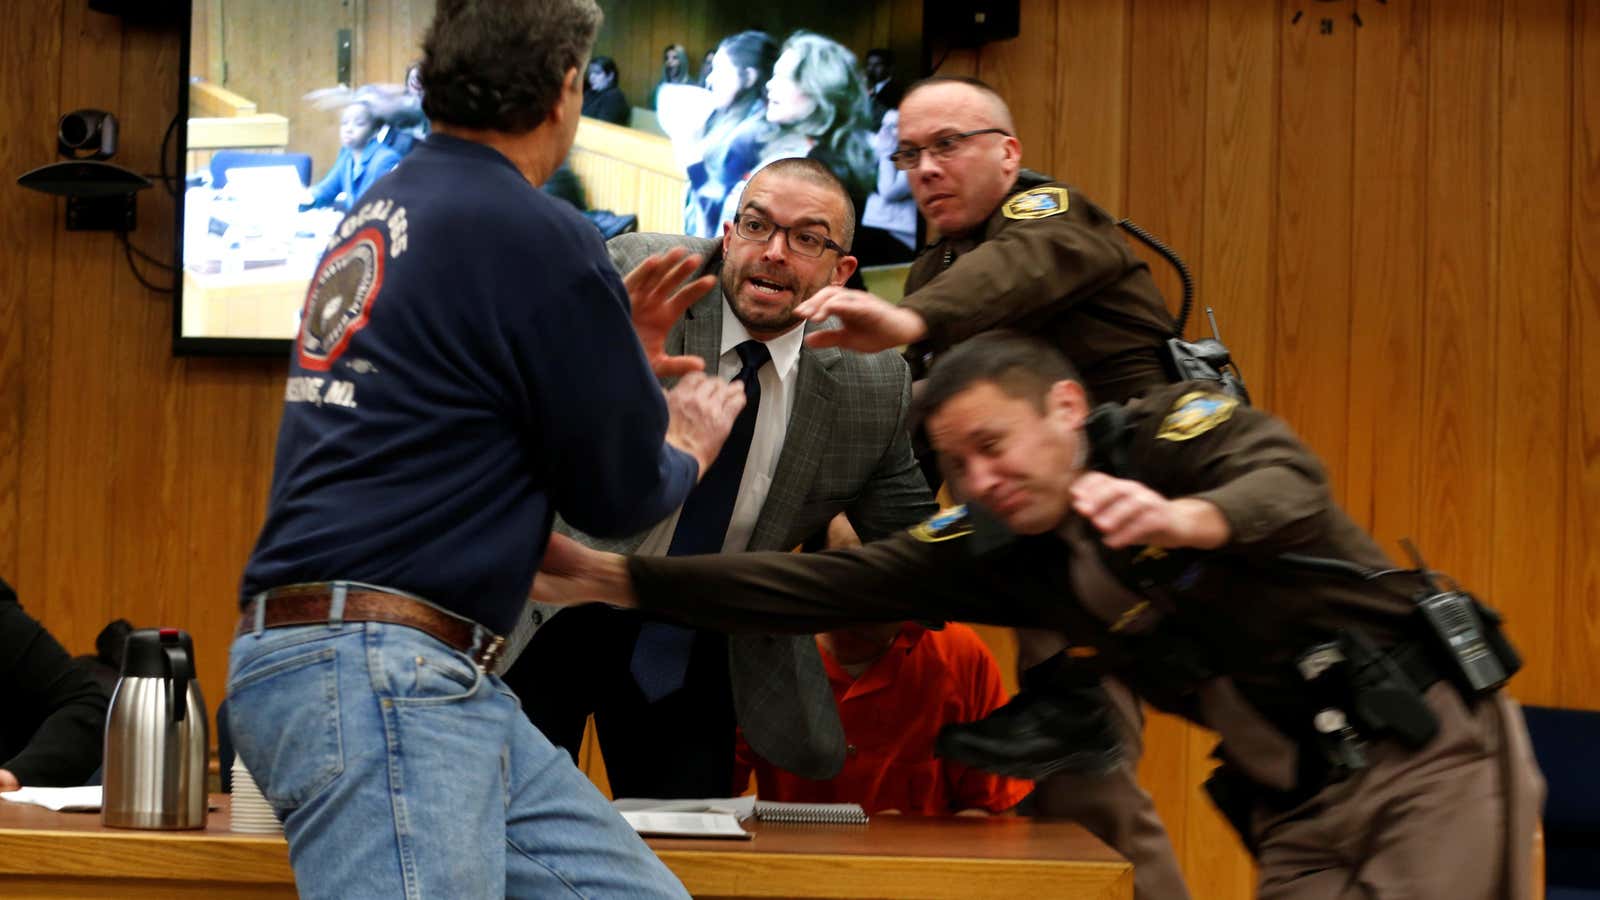 The father of three of Nassar’s numerous victims lunged at the disgraced former sports doctor in court on Friday.